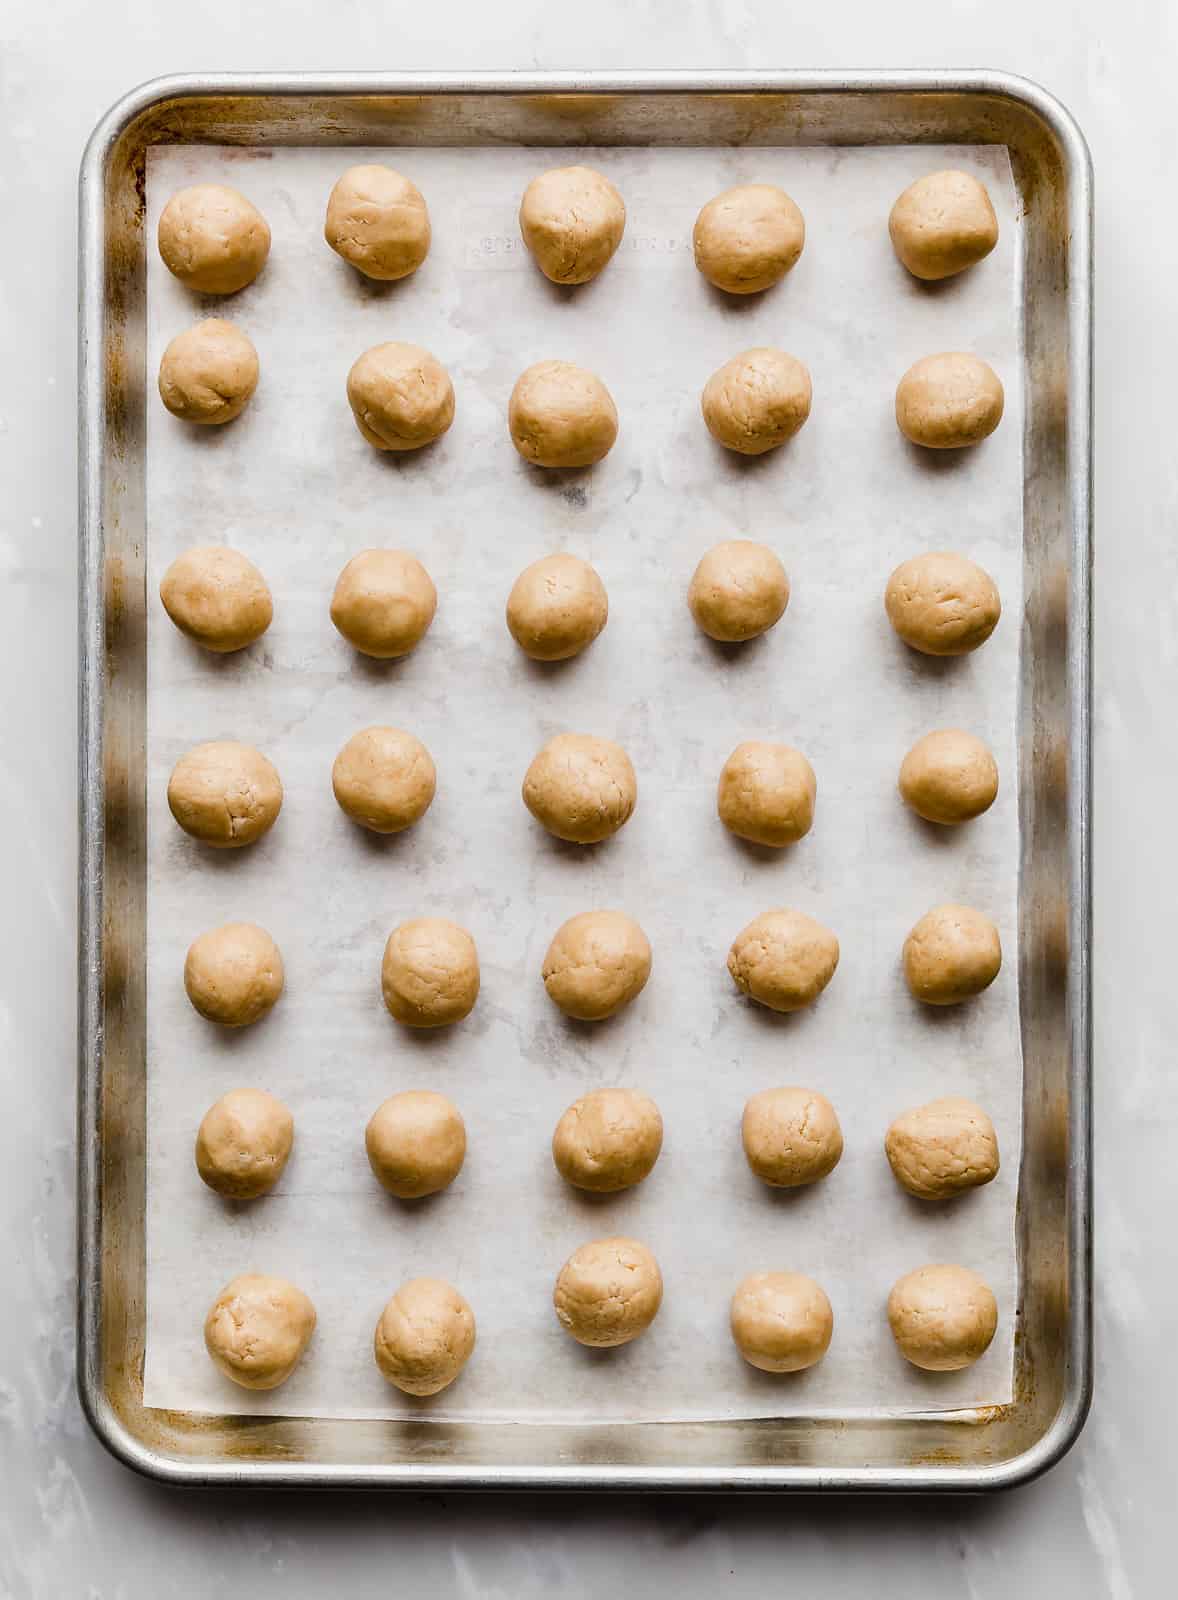 Small, round, peanut butter buckeyes lined up on a baking sheet.